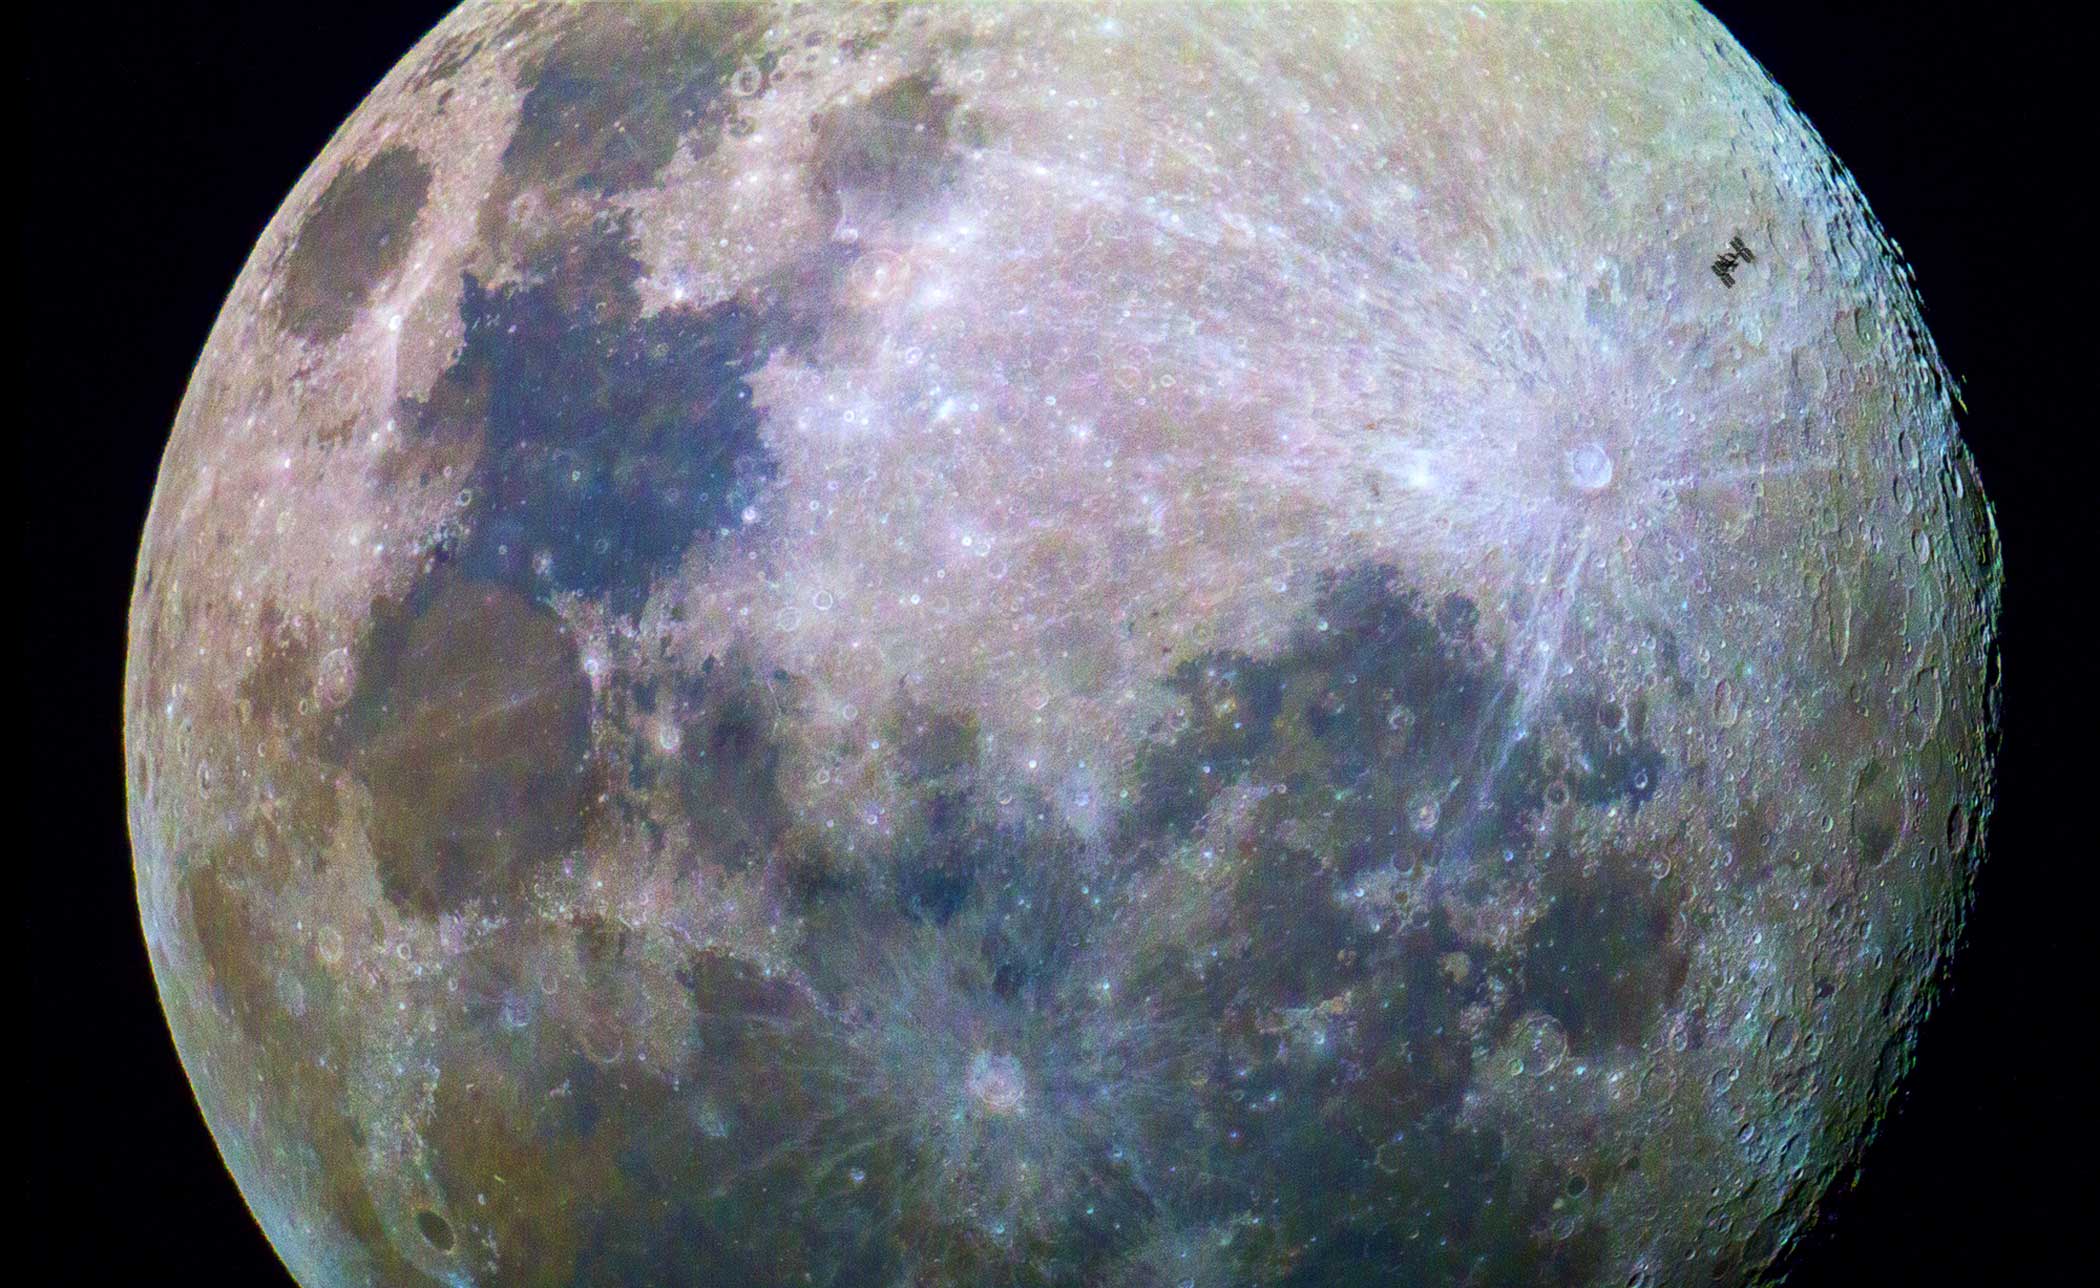 This image of the Moon was taken by amateur photographer Dylan O’Donnell as the International Space Station passed by at 28 800 km/h. At such speeds the weightless research laboratory was visible for only about a third of a second before returning to the dark skies. (Dylan O’Donnell)